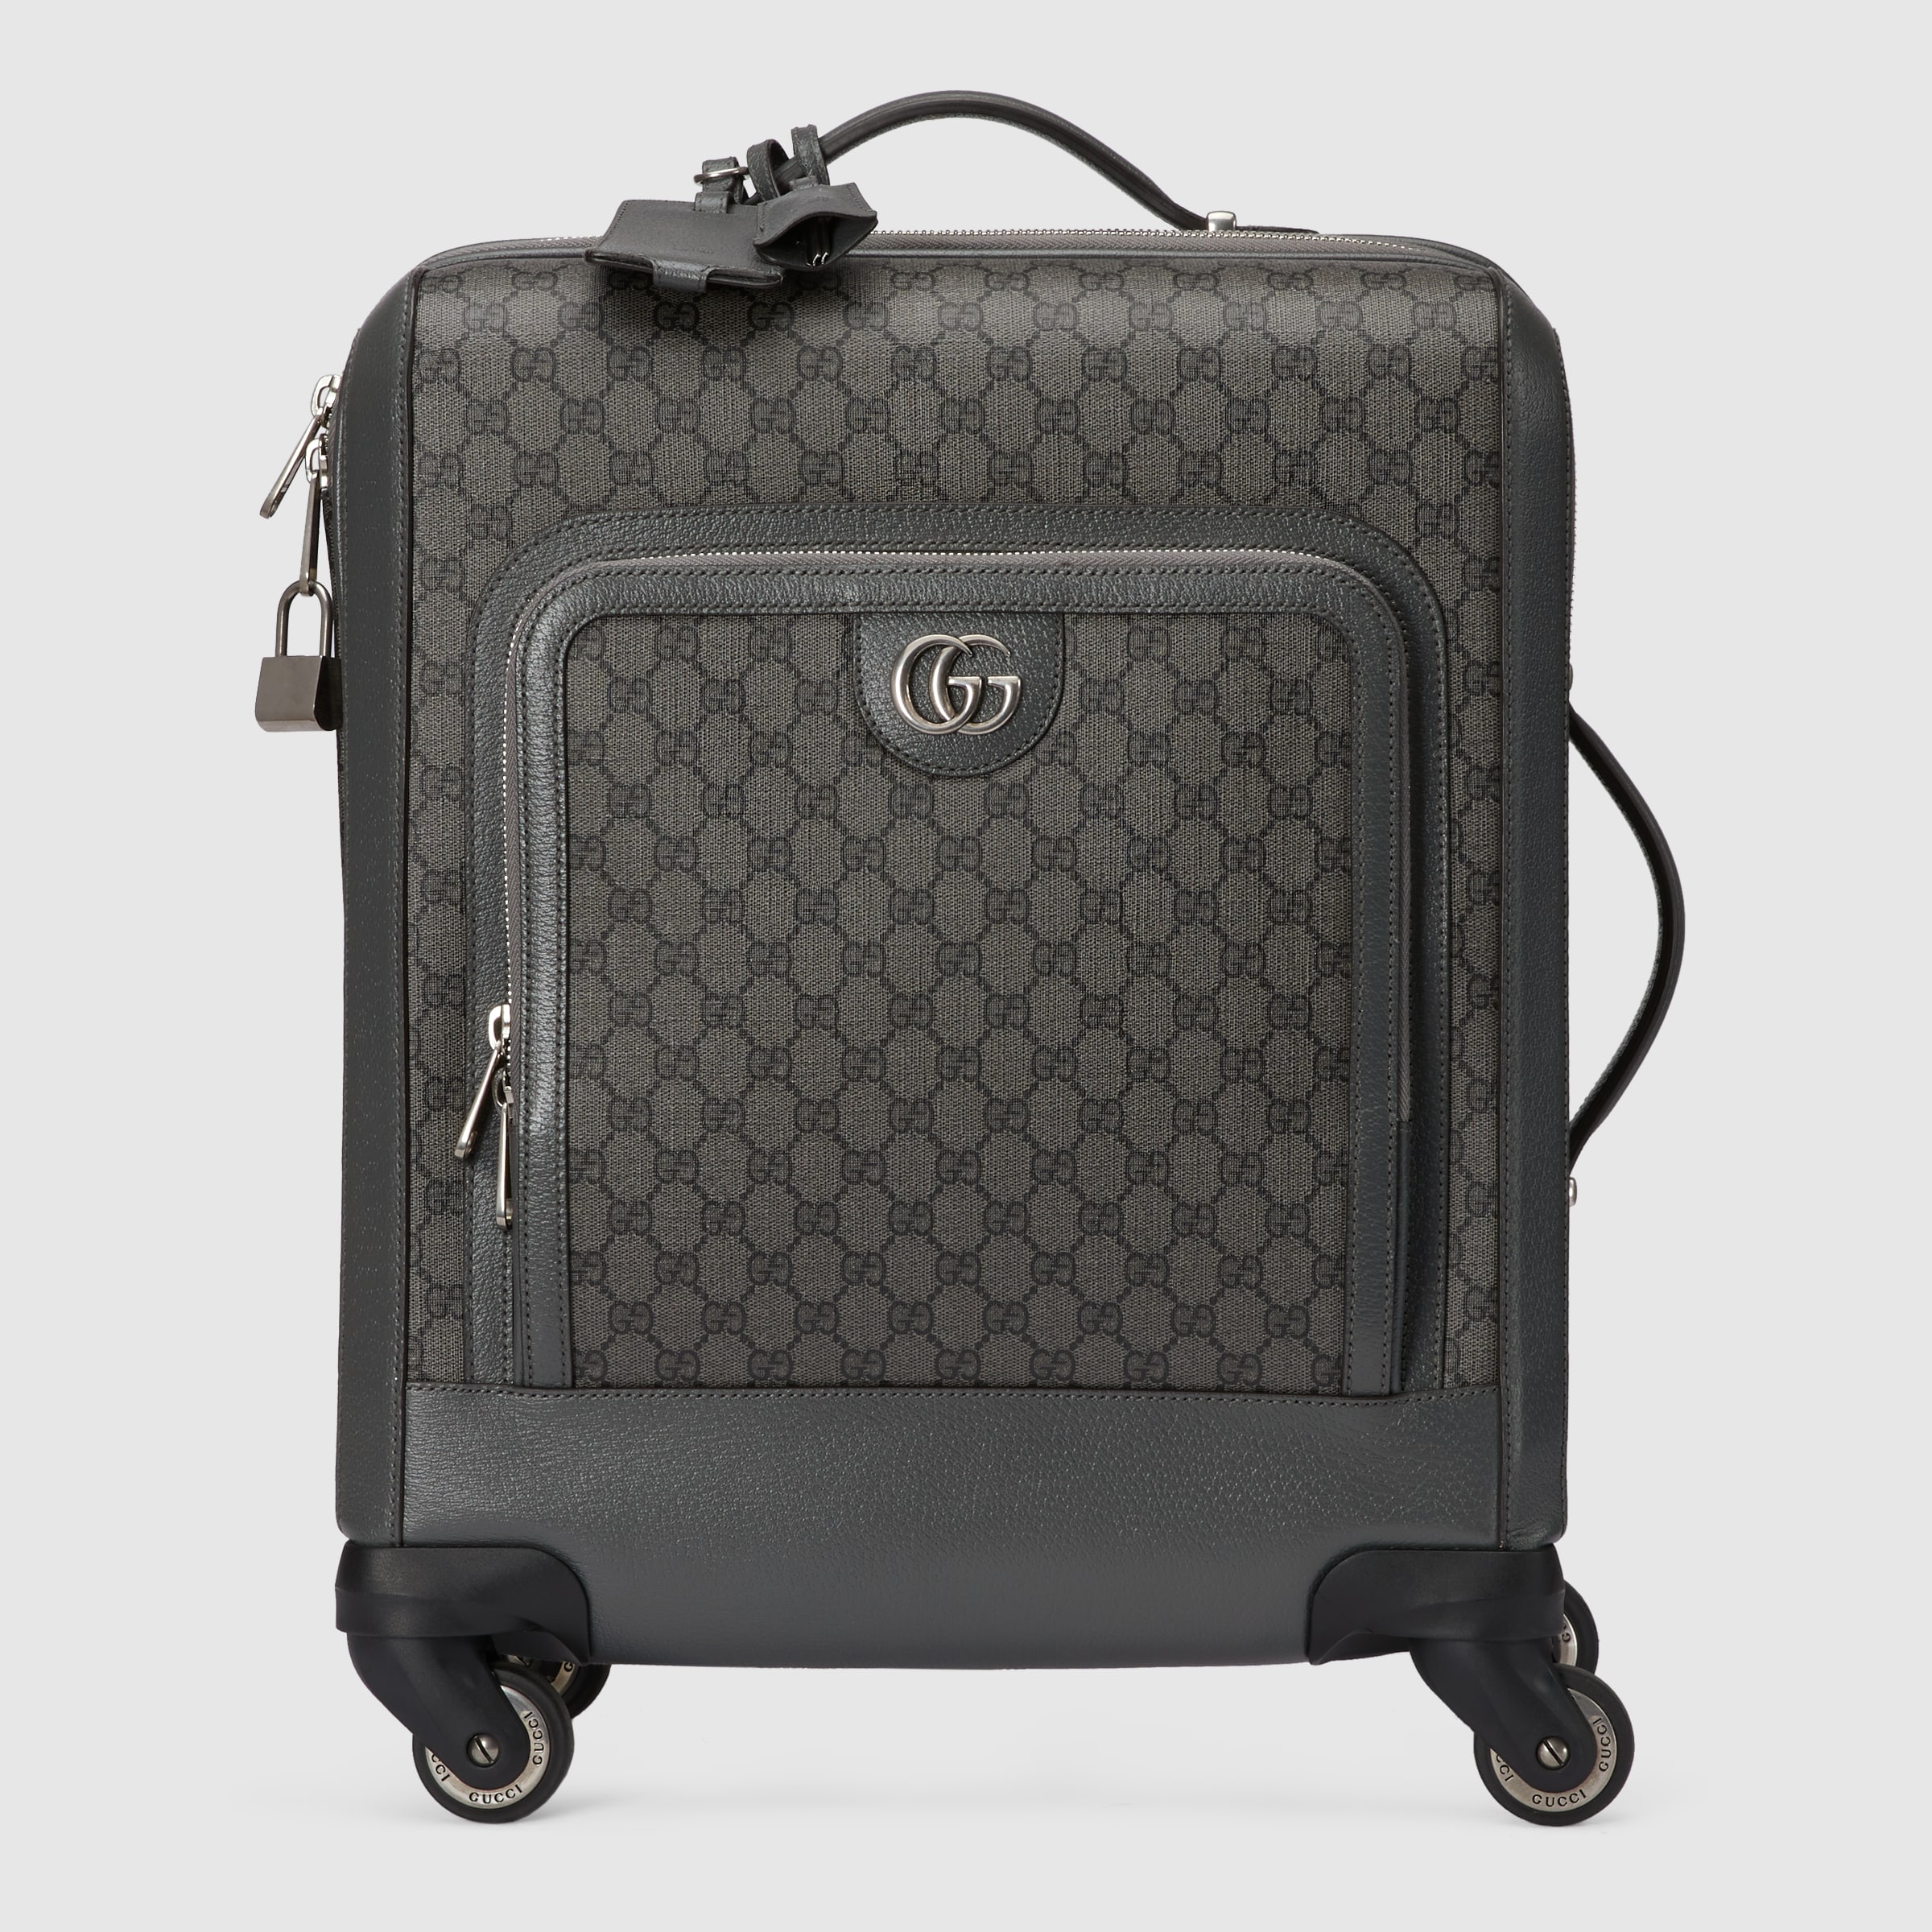 Ophidia gg small cabin gucci trolley